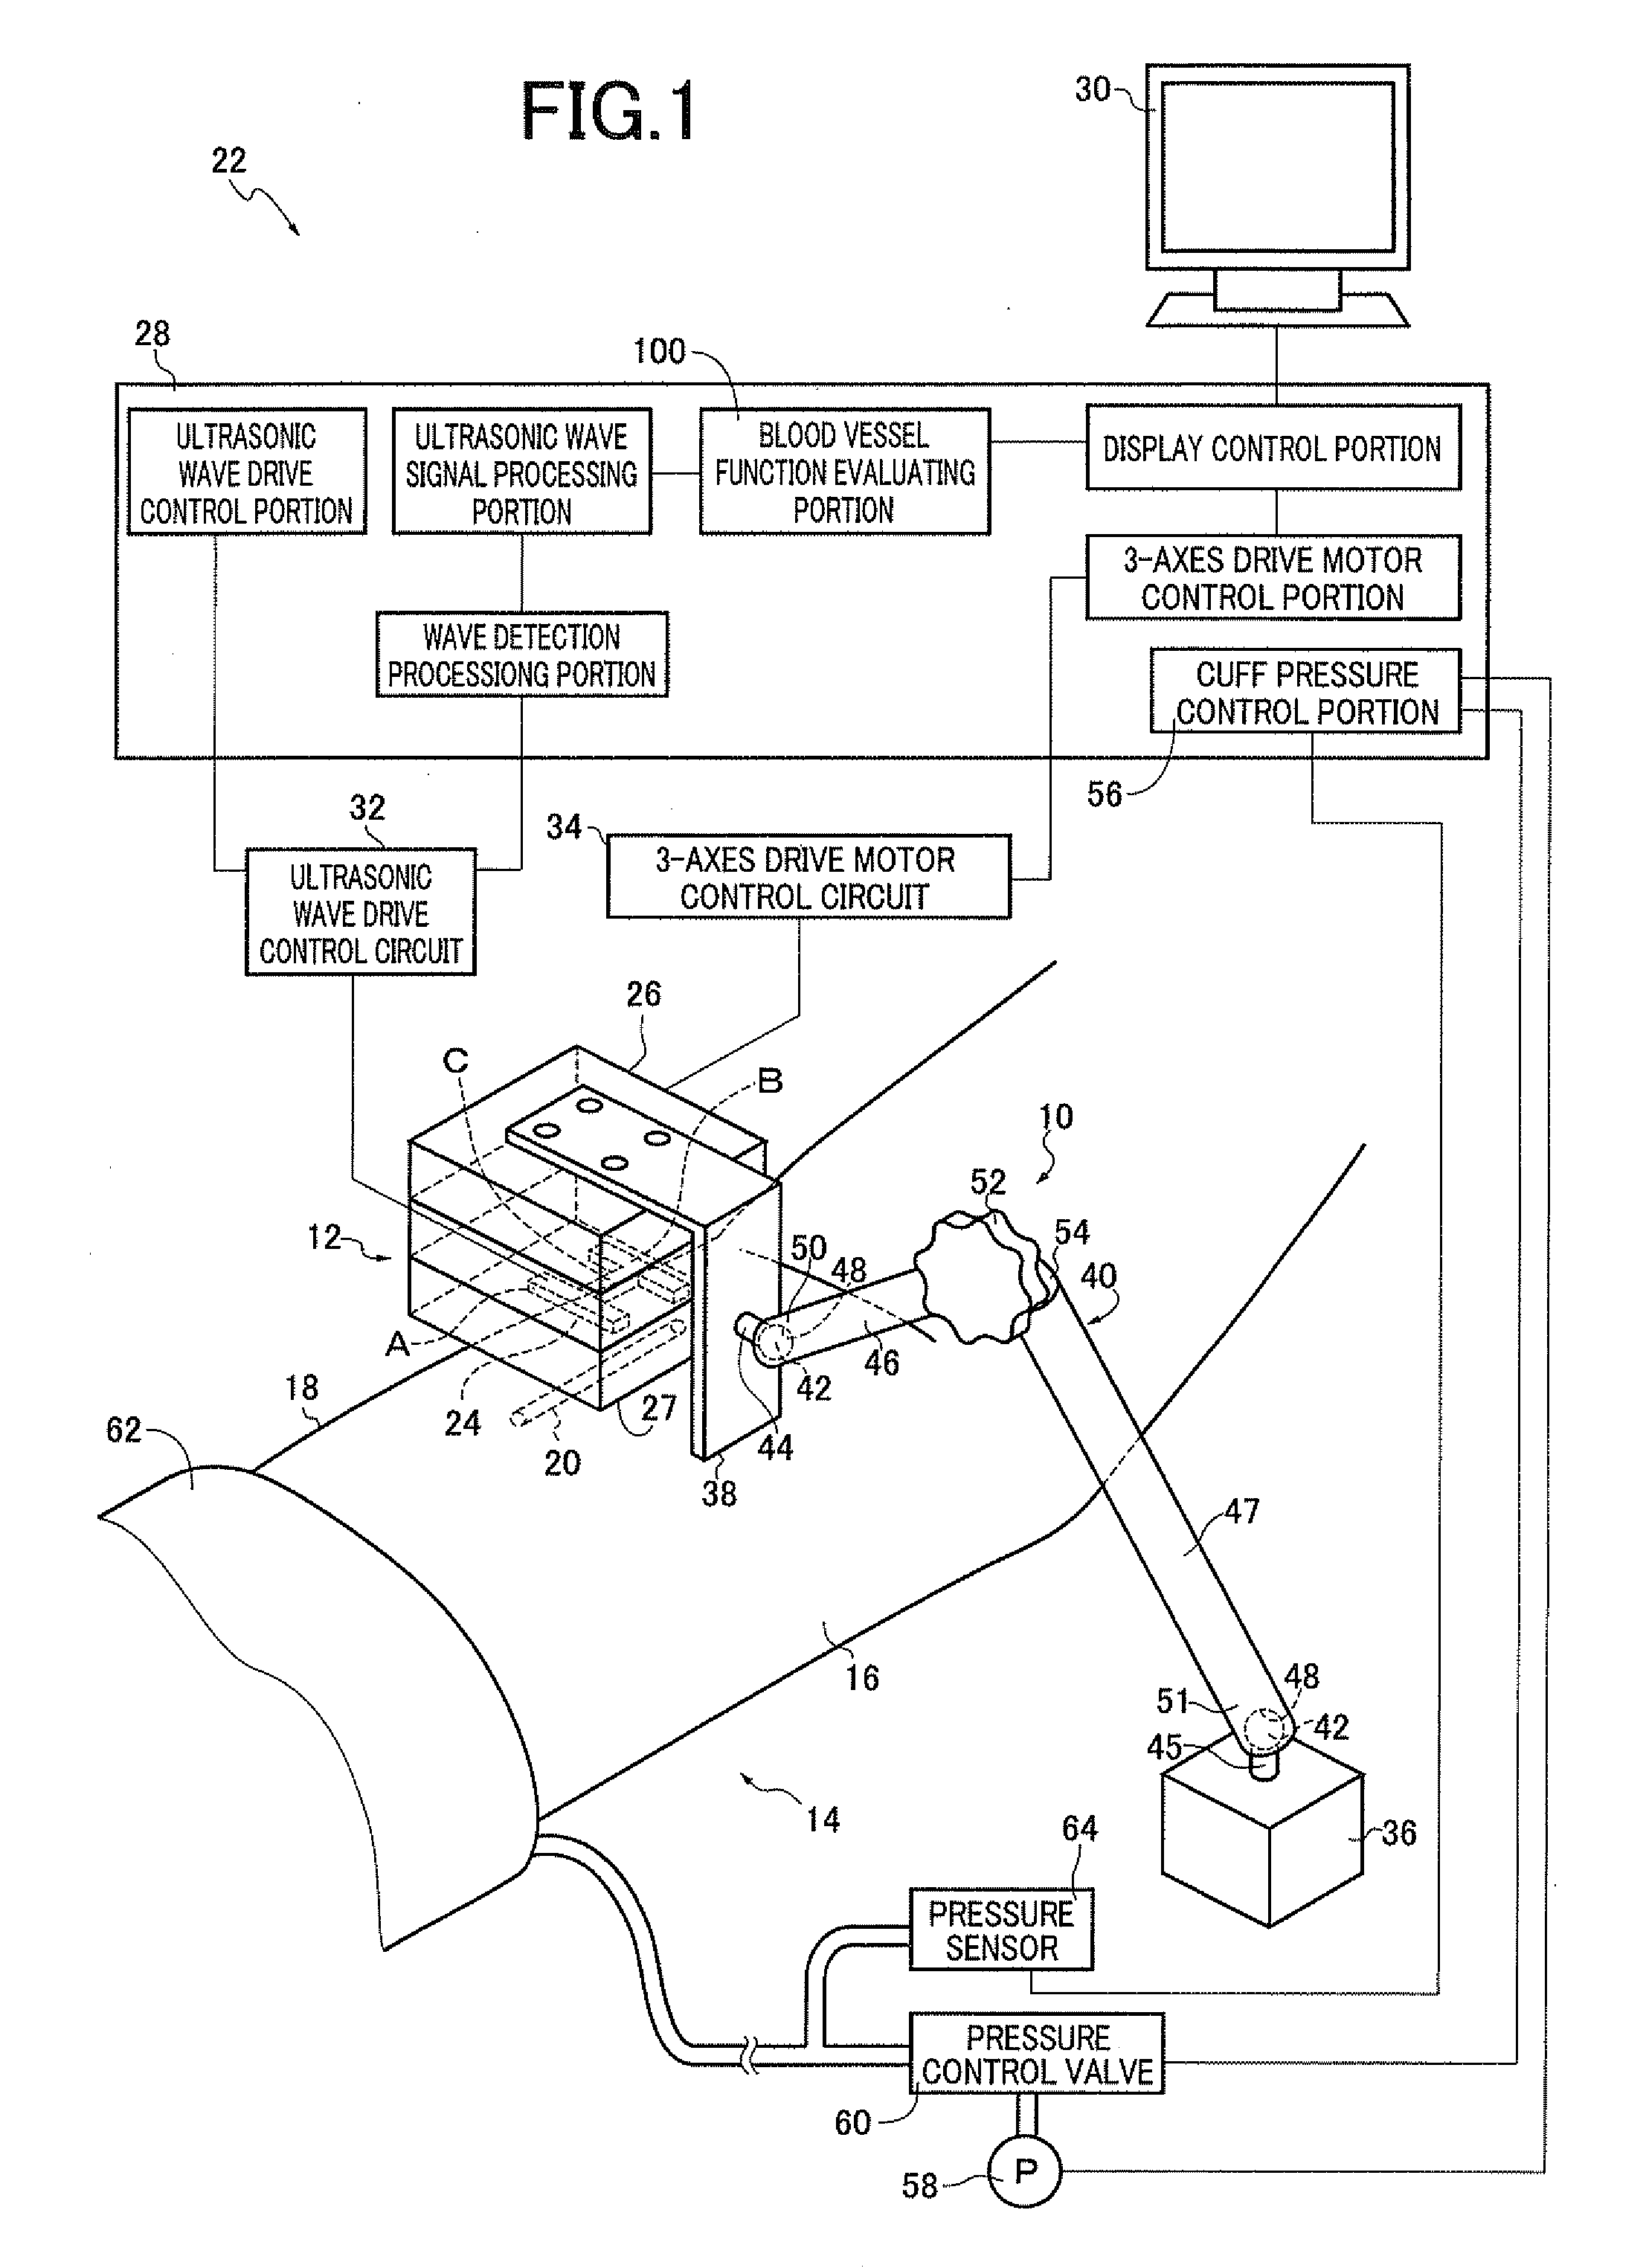 Blood vessel function inspecting apparatus